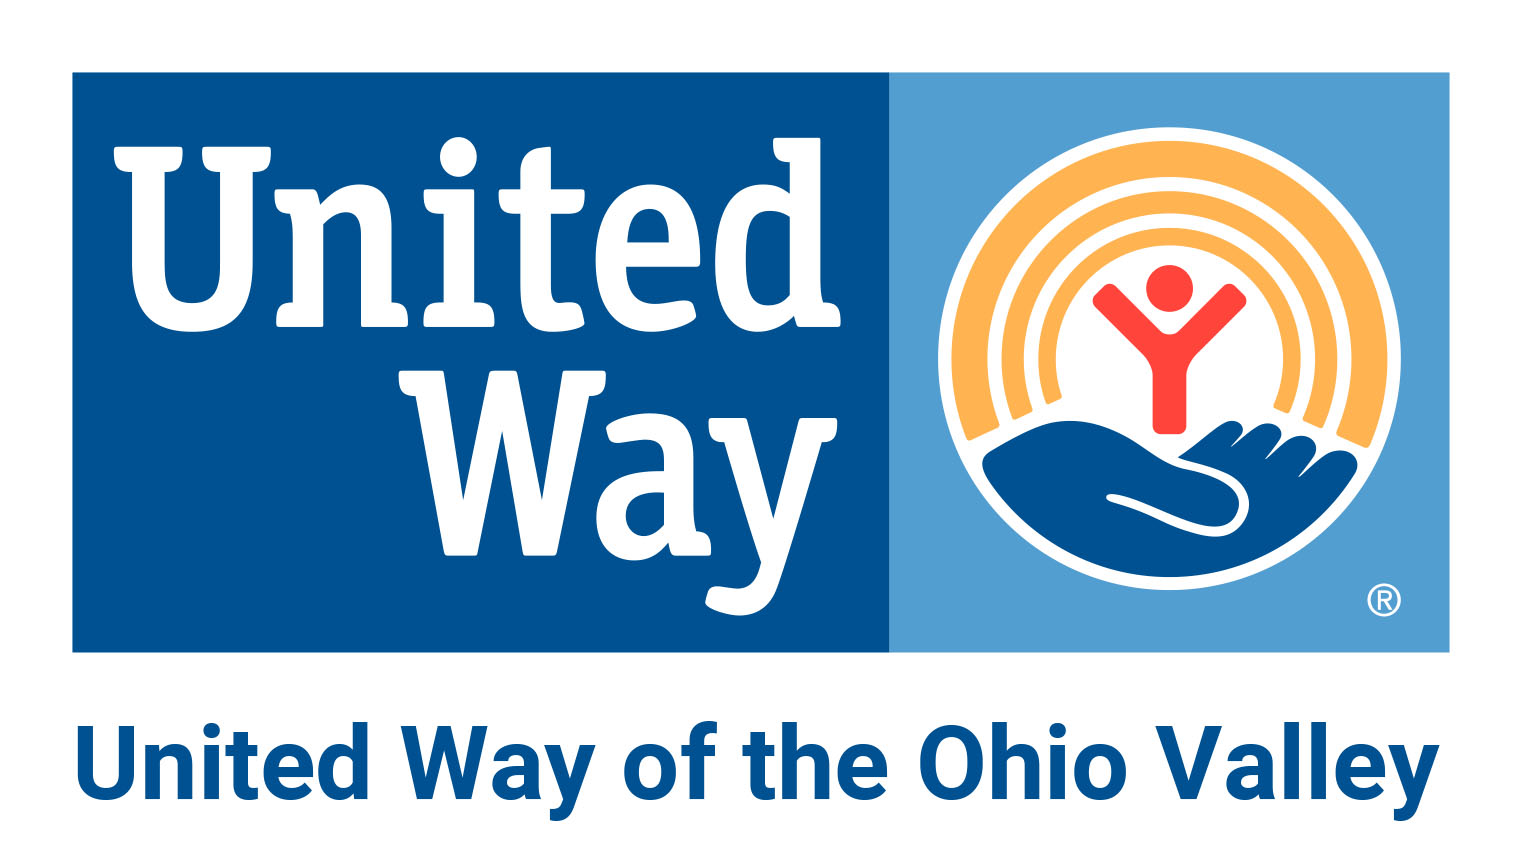 United Way of the Ohio Valley